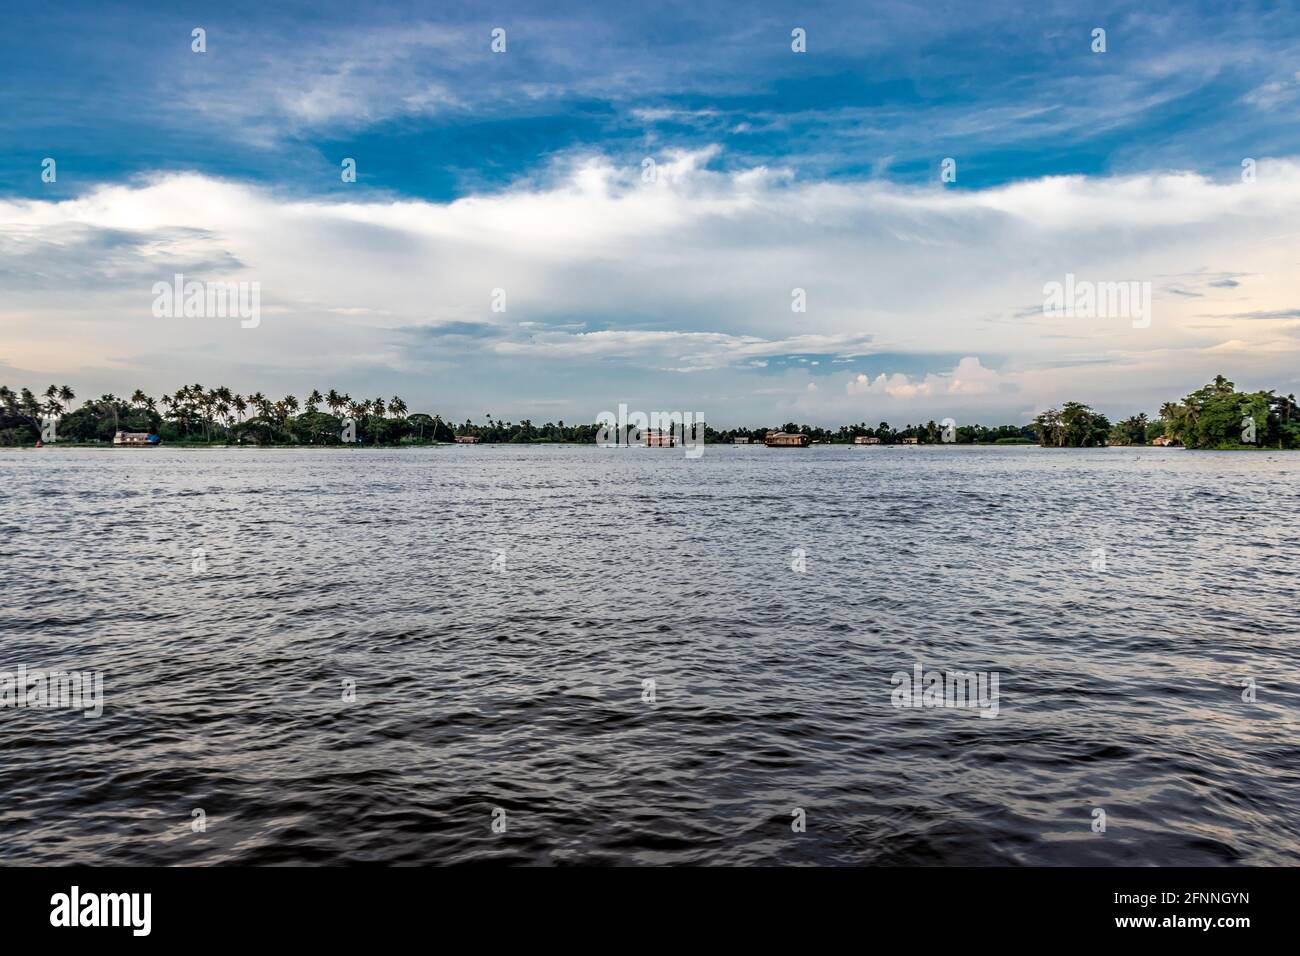 Backwater view at alleppey kerala india with blue sky and palm tree Stock Photo